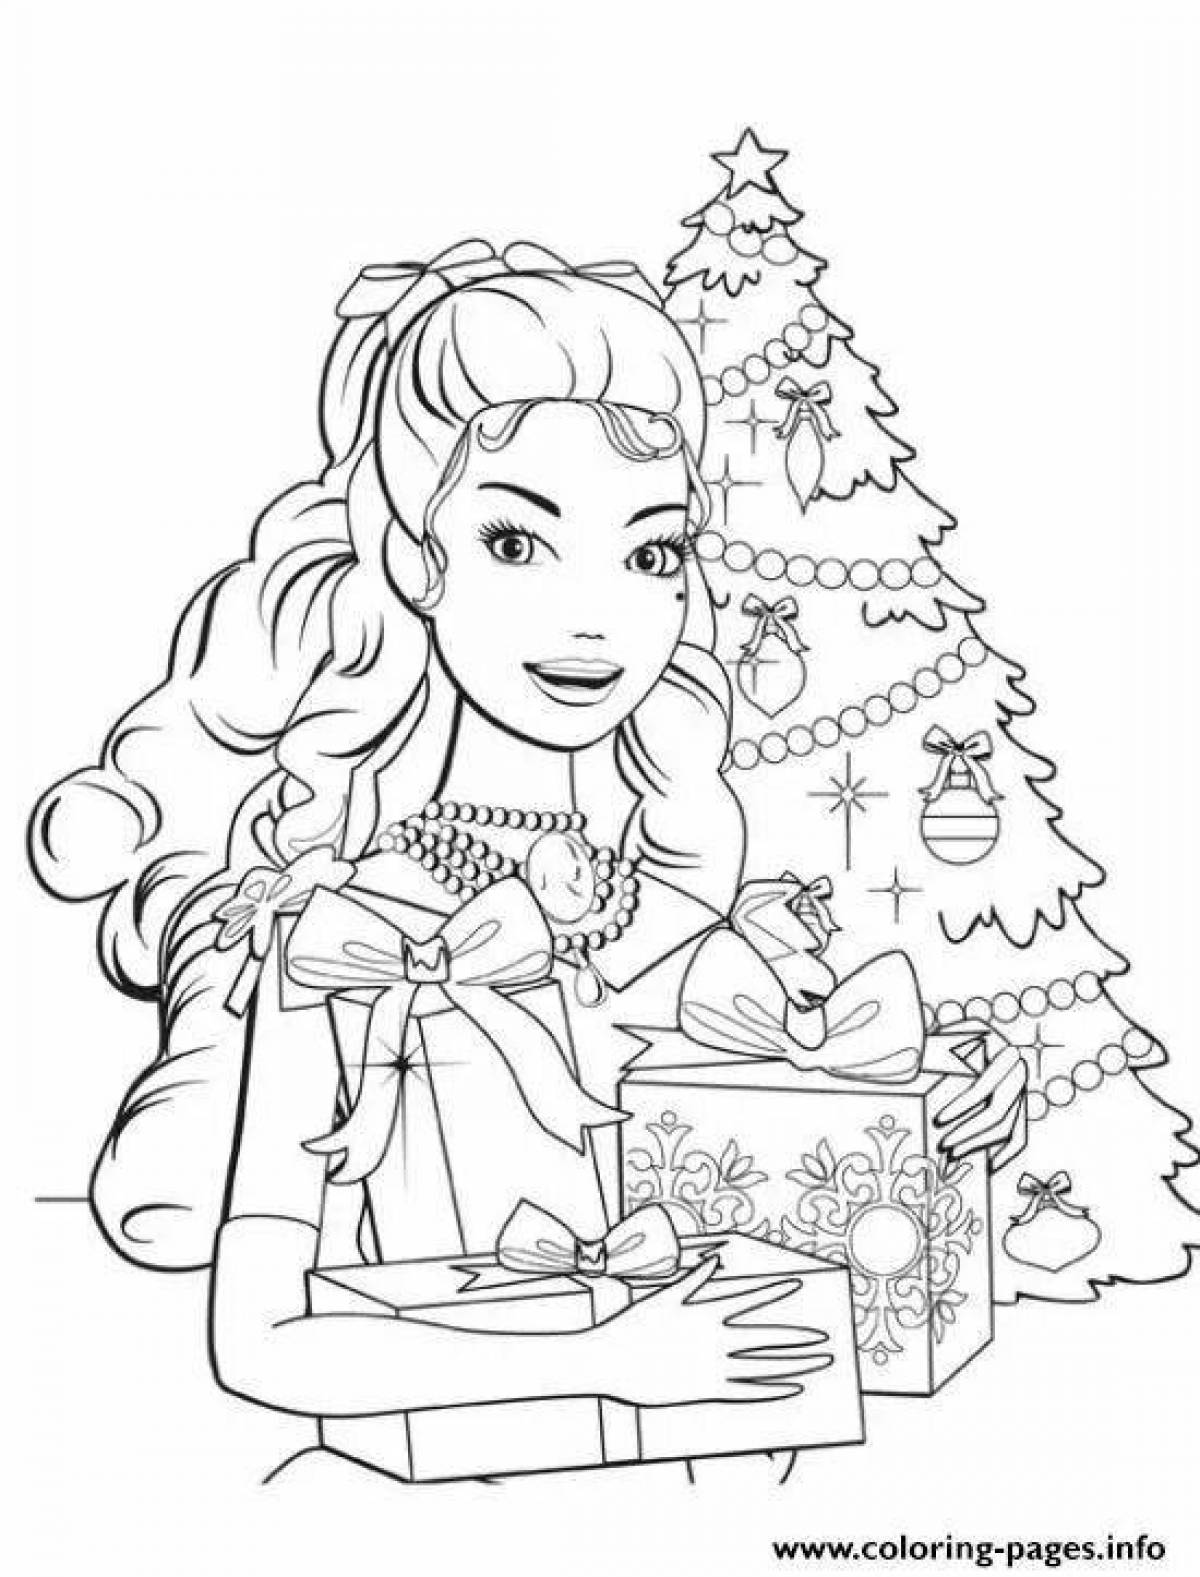 Magic winter coloring book for girls